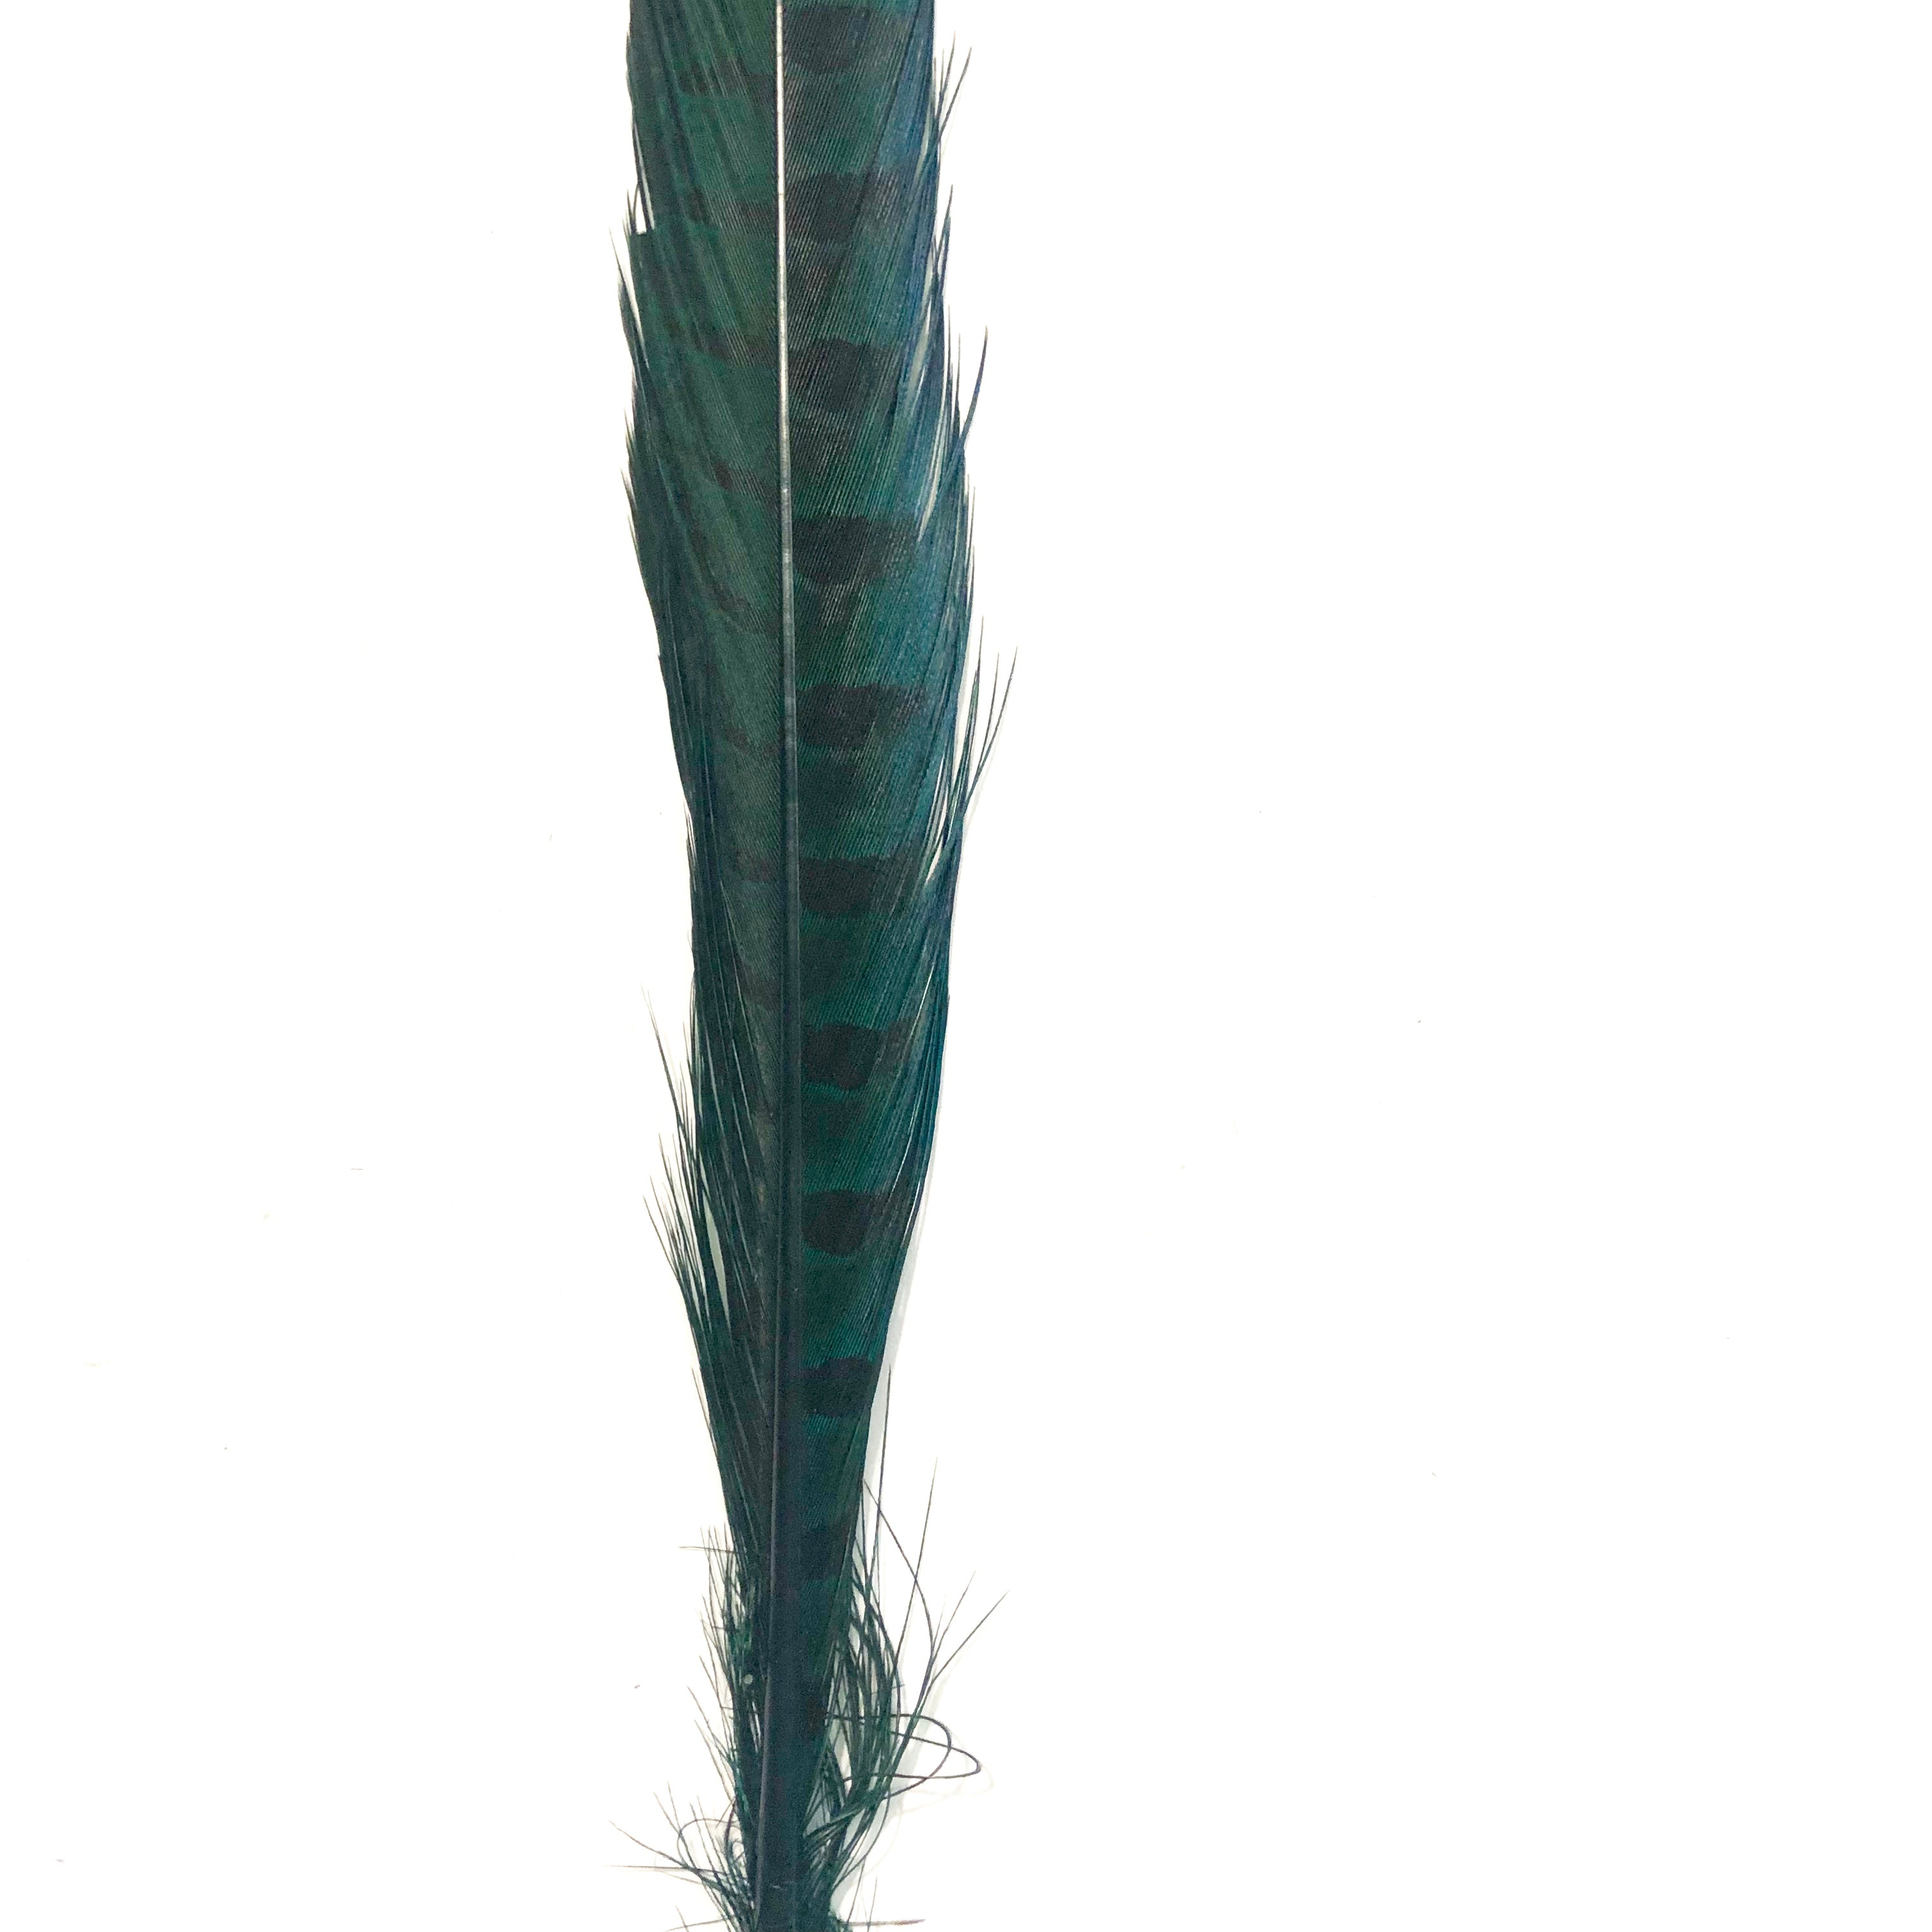 10" to 20" Ringneck Pheasant Tail Feather - Emerald Green ((SECONDS))